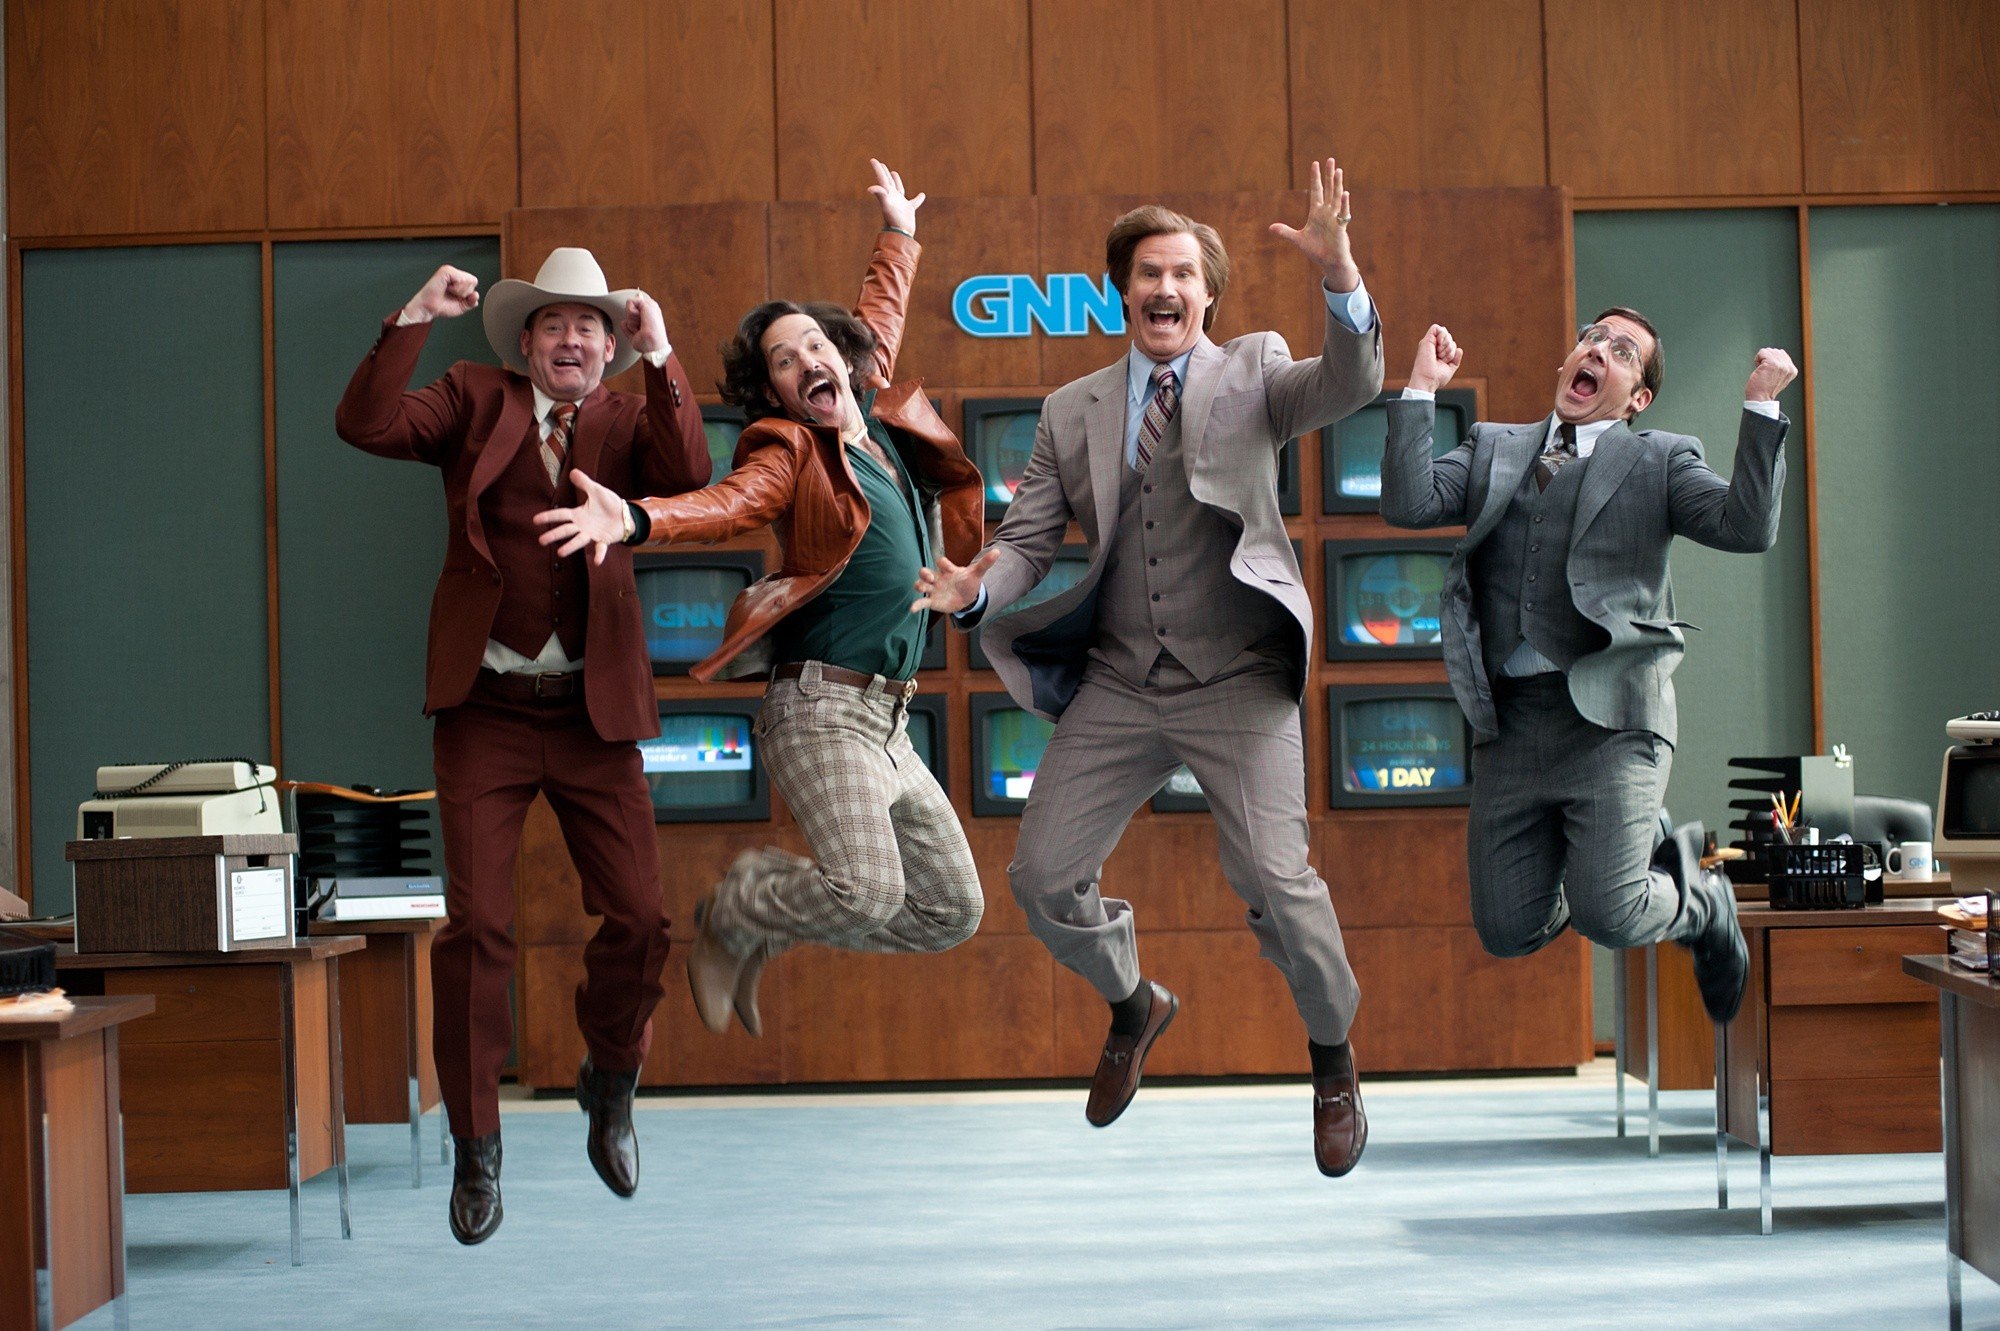 David Koechner, Paul Rudd, Will Ferrell and Steve Carell in Paramount Pictures' Anchorman: The Legend Continues (2013)